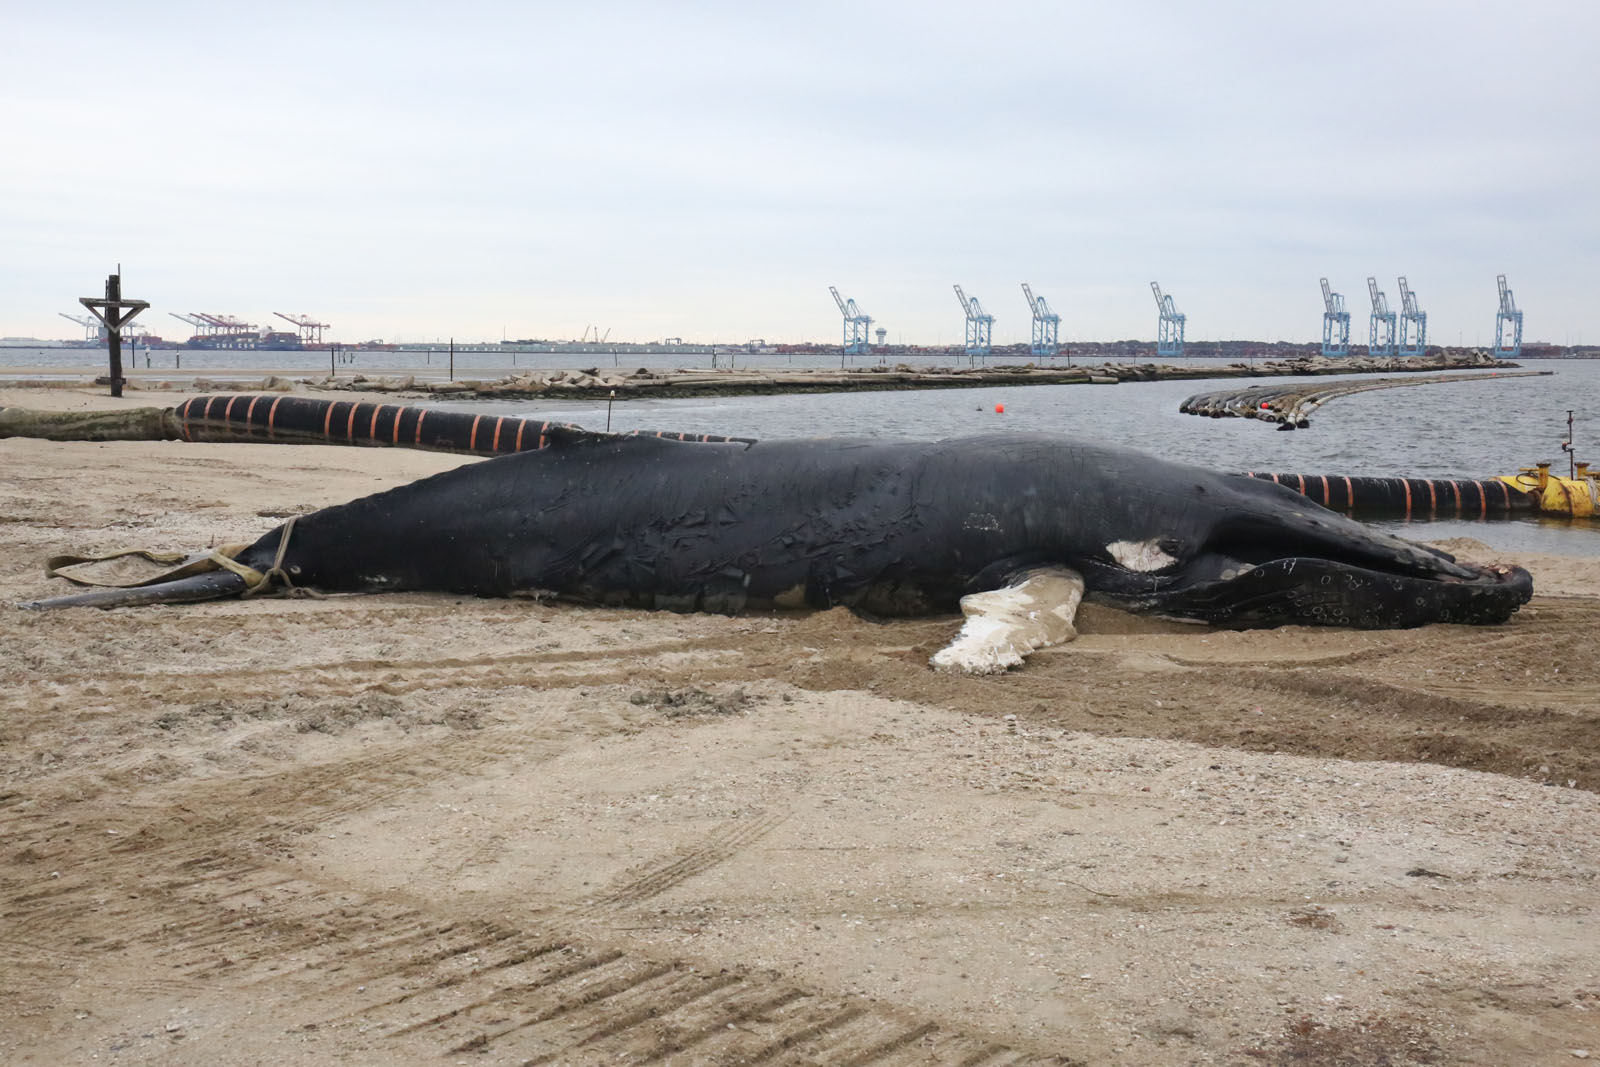 An image of the injuries sustained by the whale provided by the Virginia Aquarium and Marine Science Center. Two dead humpback whales have been pulled from Virginia waters in the span of just a few days. (Courtesy Virginia Aquarium and Marine Science Center)